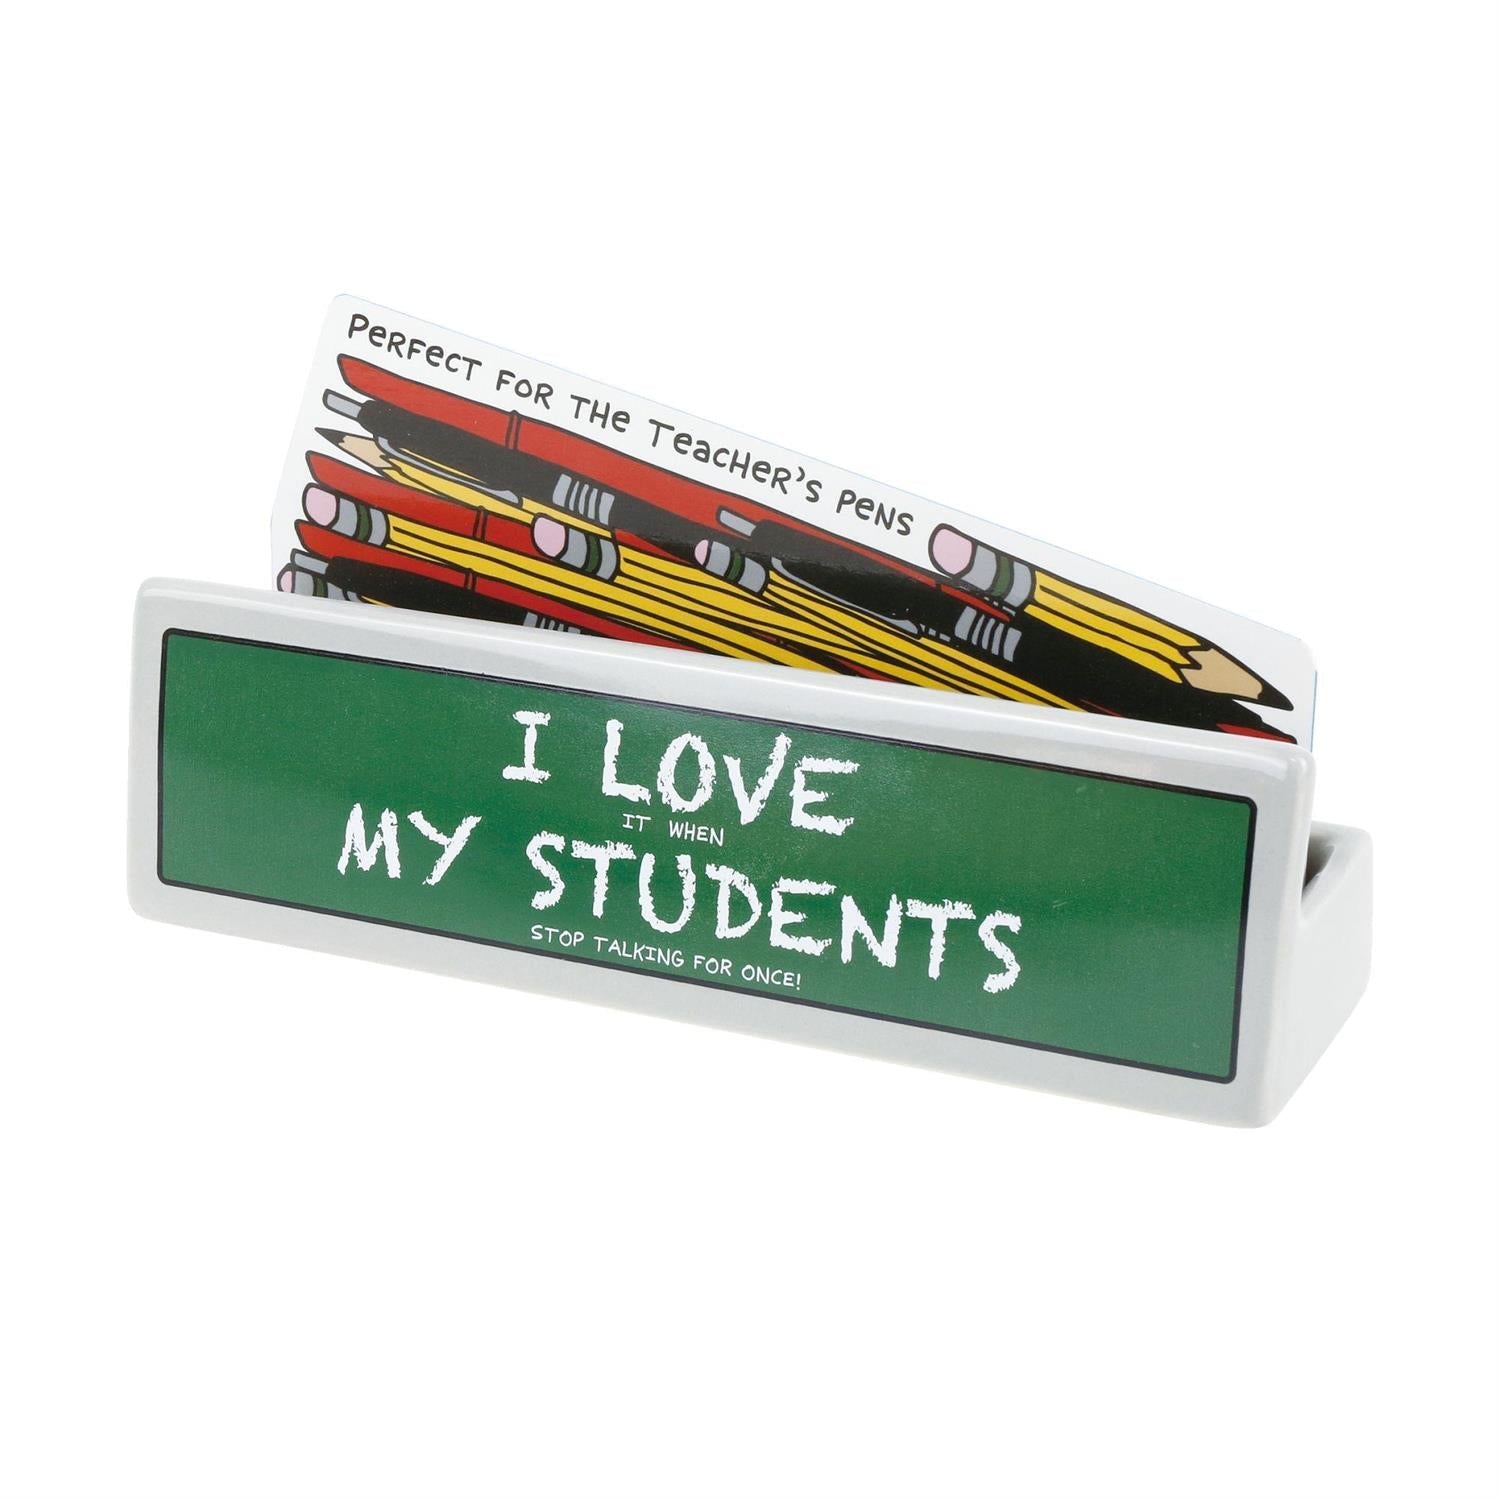 I Love My Students Catch All Container Plaque